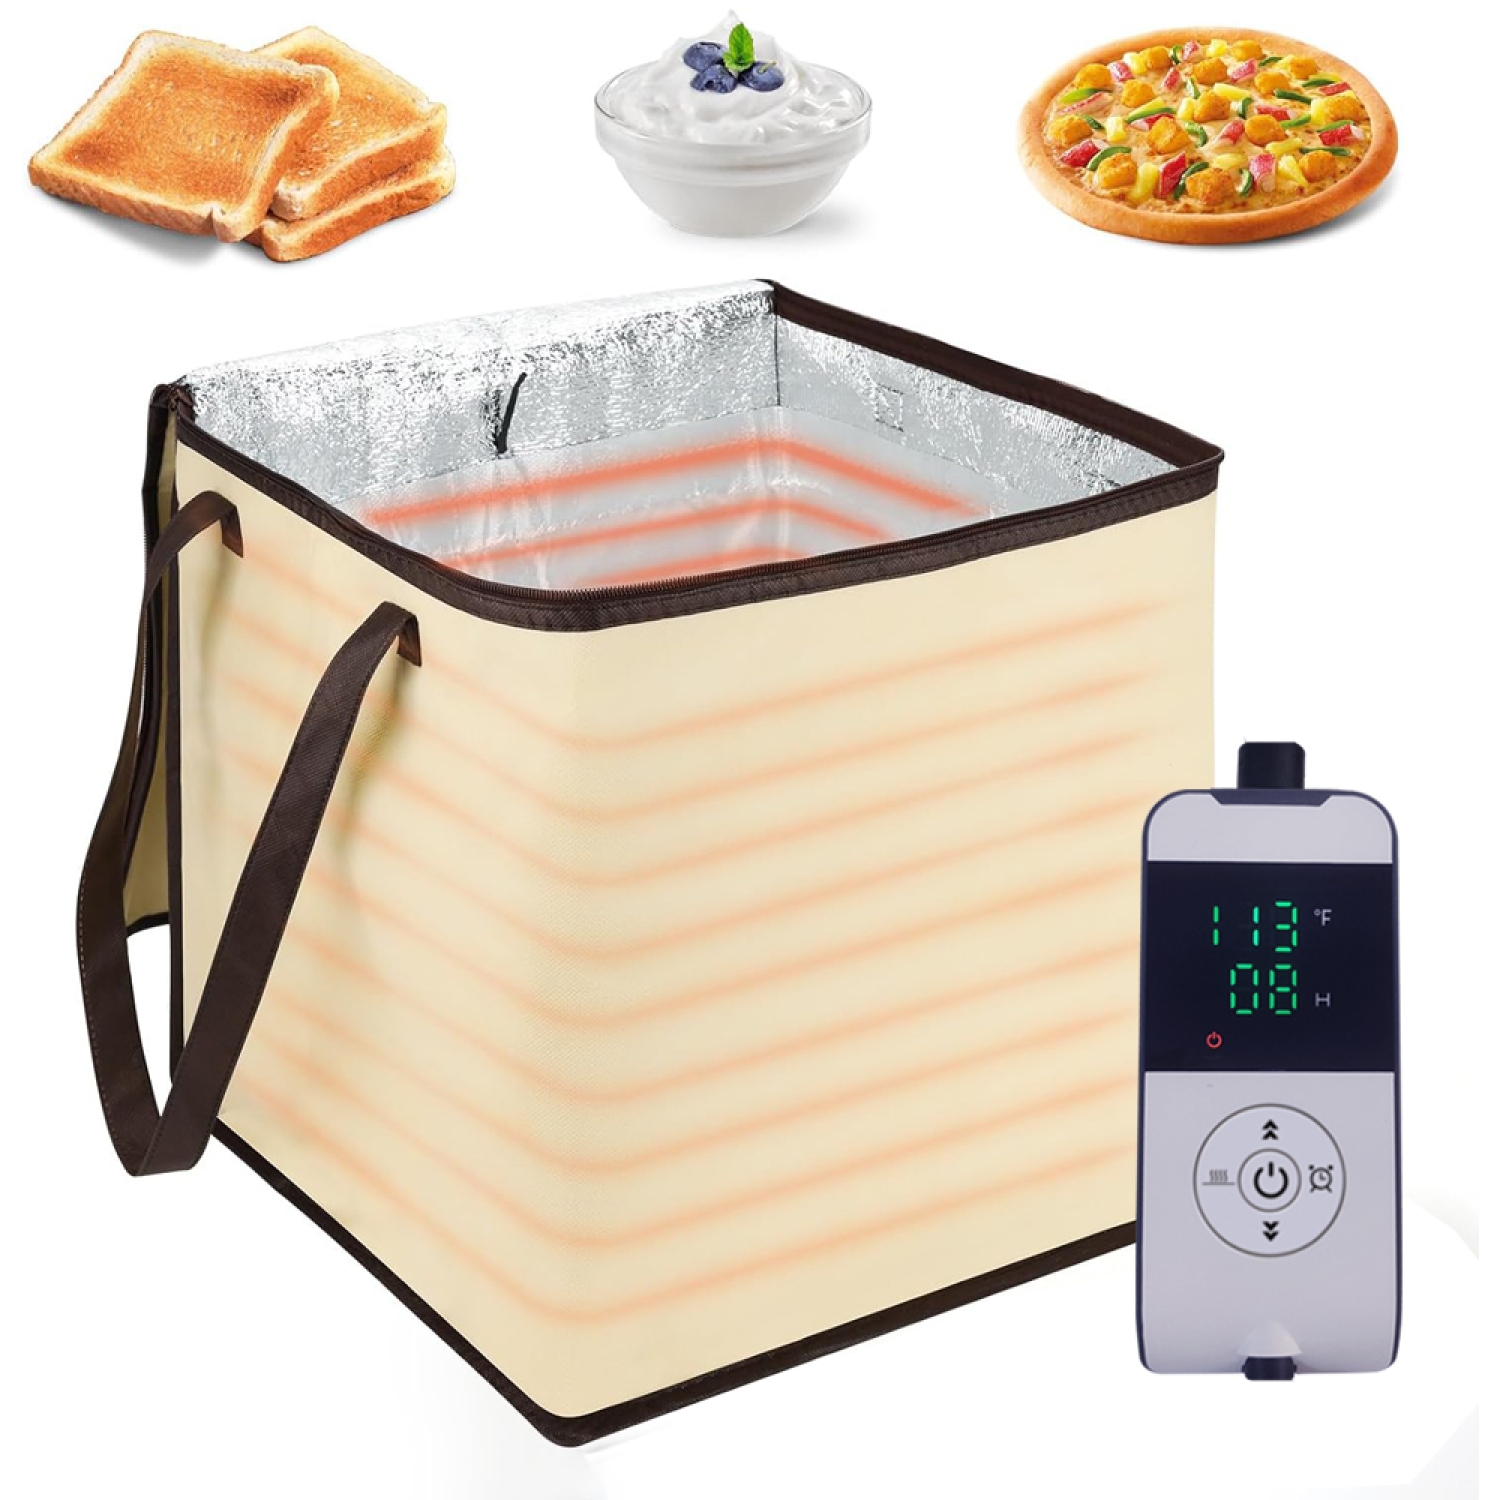 Dough Proofer with Heater, Bread Pizza Dough Proofing Box Temperature Control Proofing